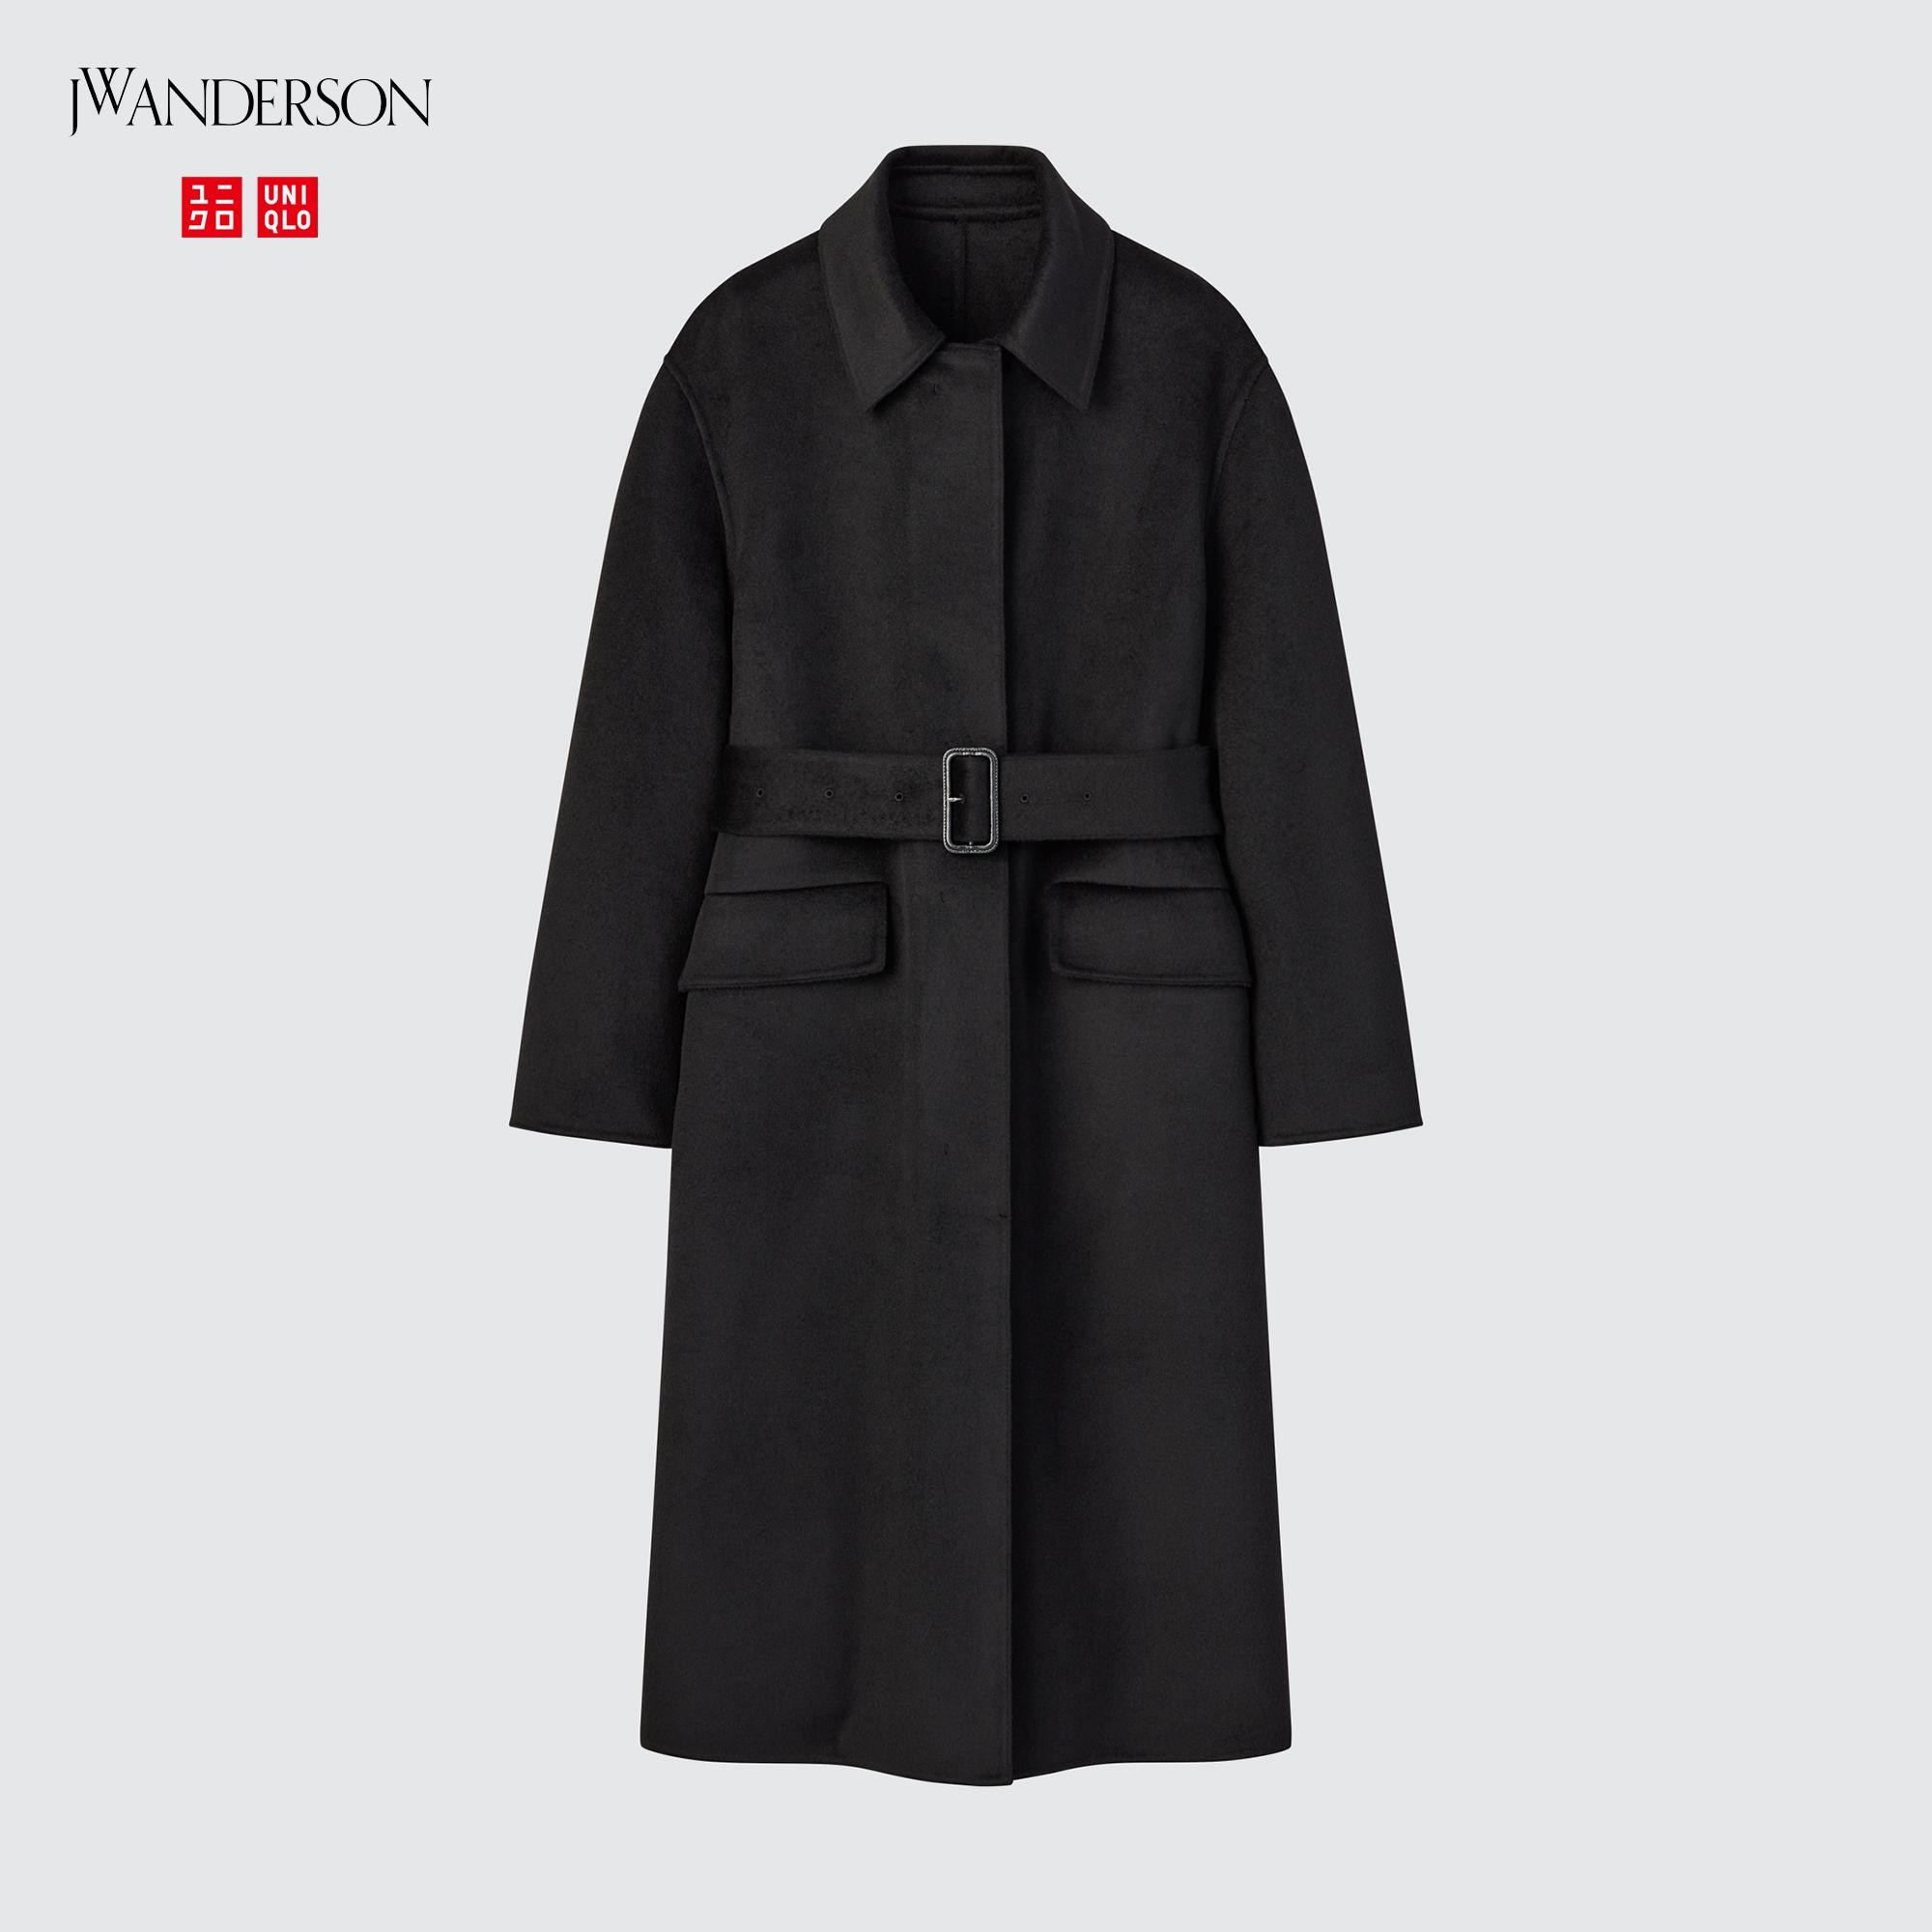 JW ANDERSON DOUBLE FACE BELTED COAT